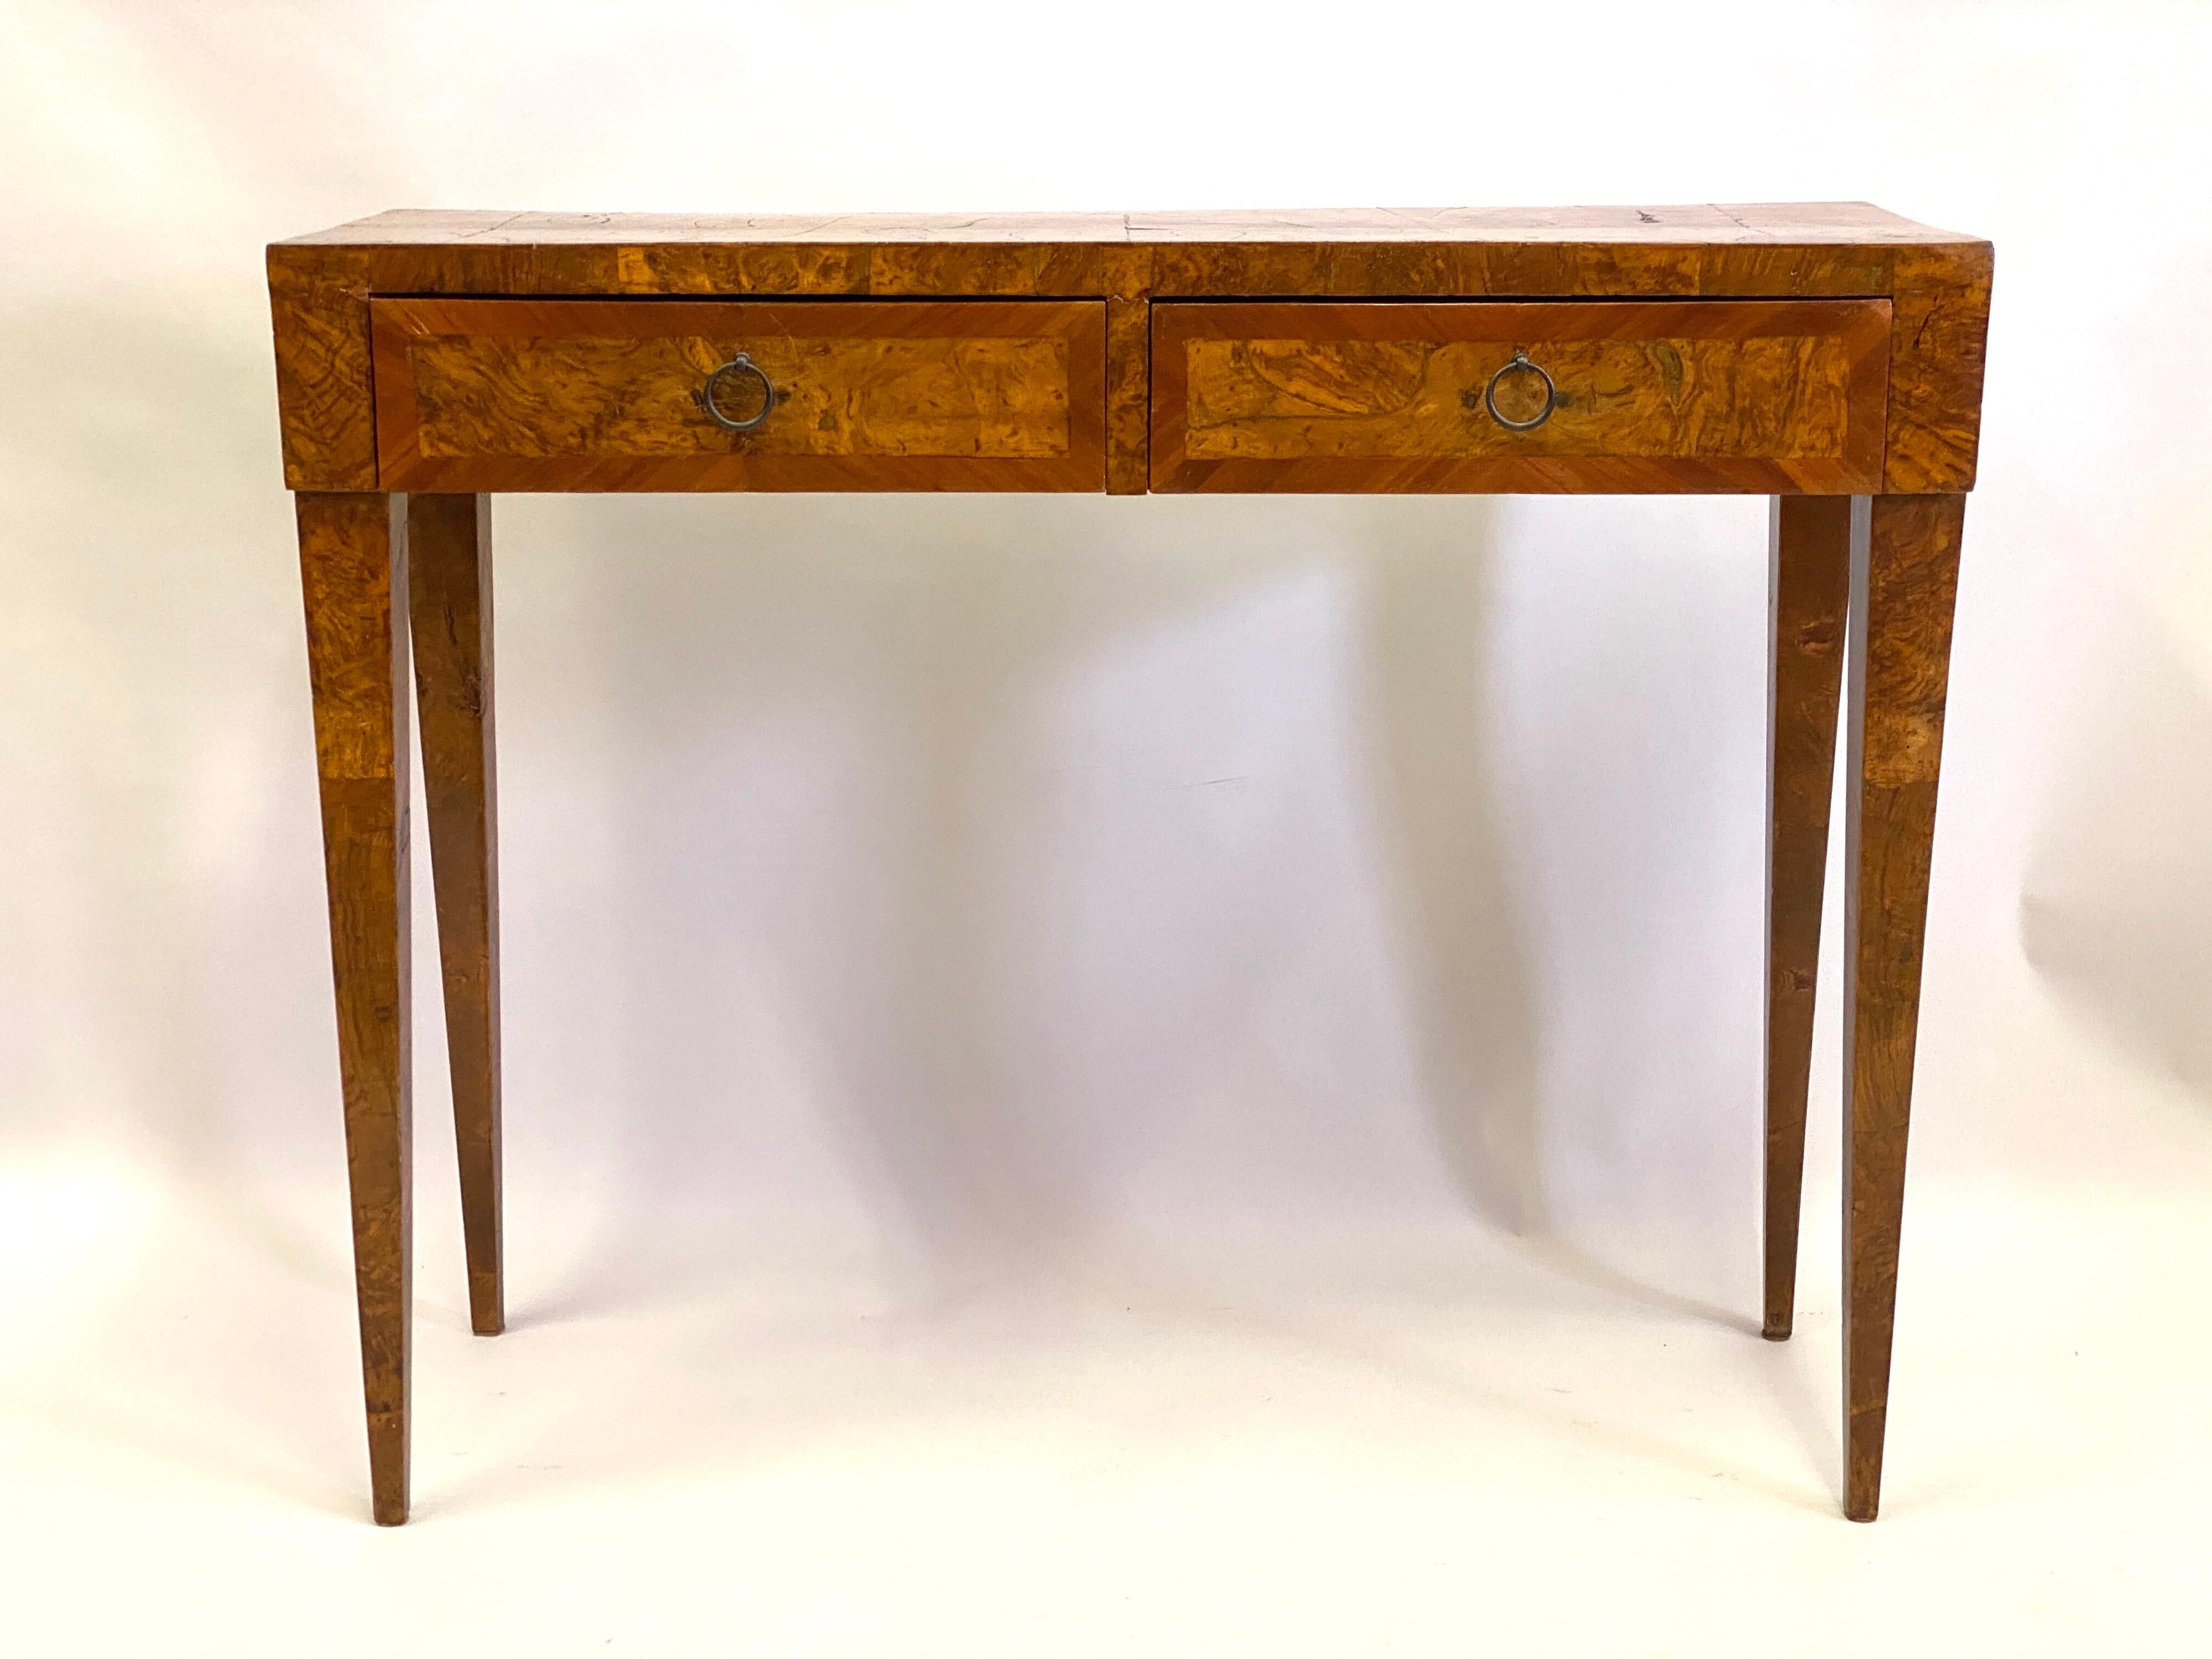 Elegant French Mid-Century Modern neoclassical console or desk or vanity from the circle of Jean-Michel Frank.

The piece is composed of fruitwood with sober lines, elegantly tapered legs and 2 drawers with bronze ring pulls. It is finished on 3